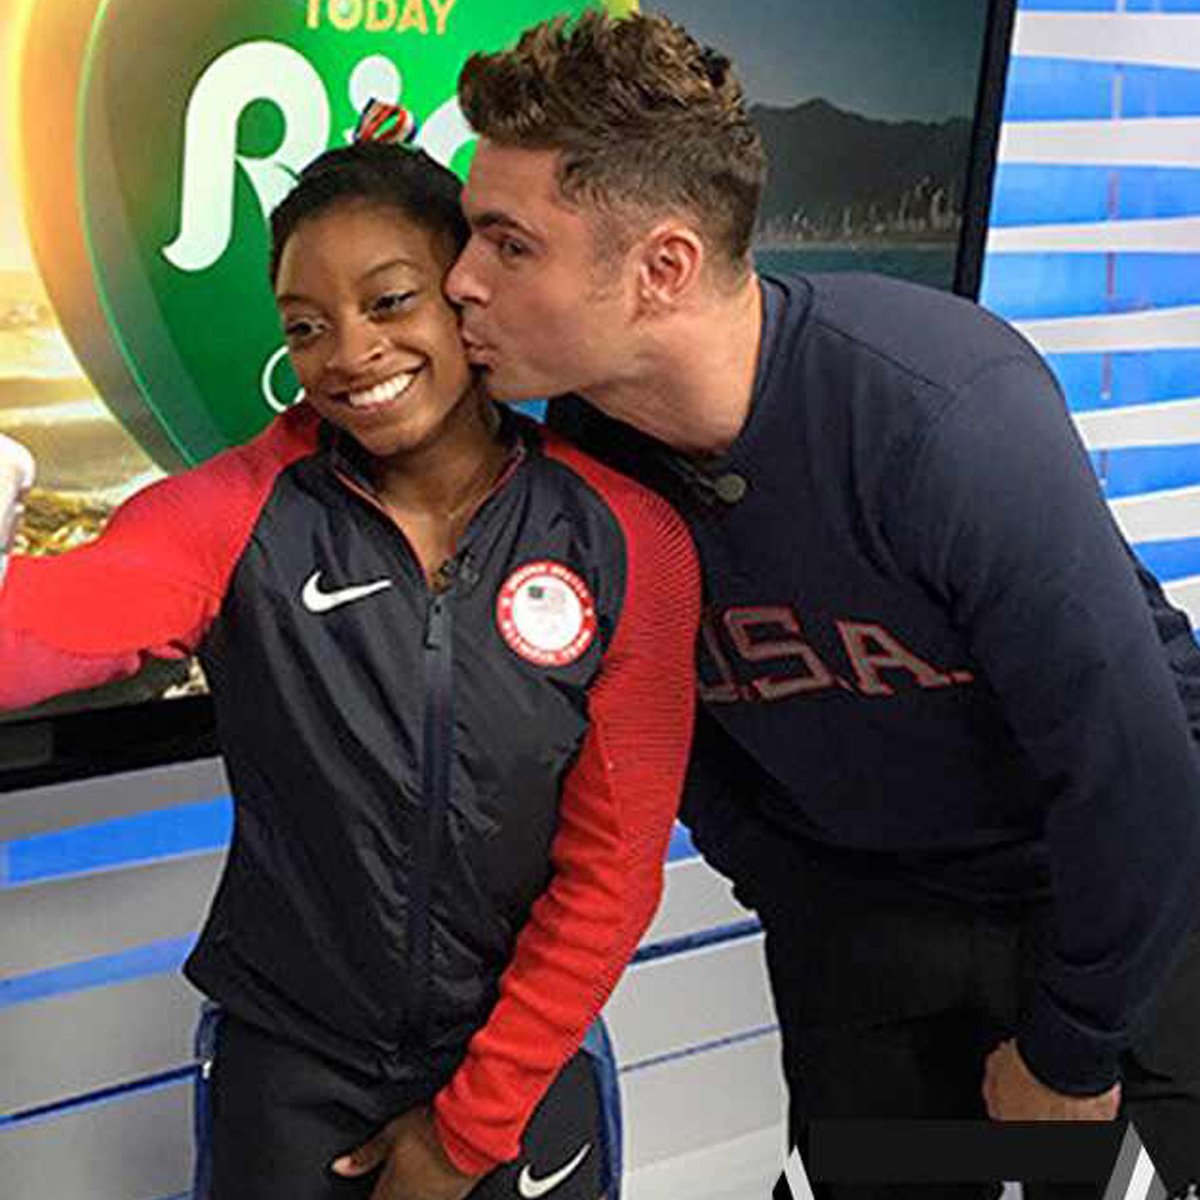 When Simone Biles Met Zac Efron—And More Viral Olympic Moments